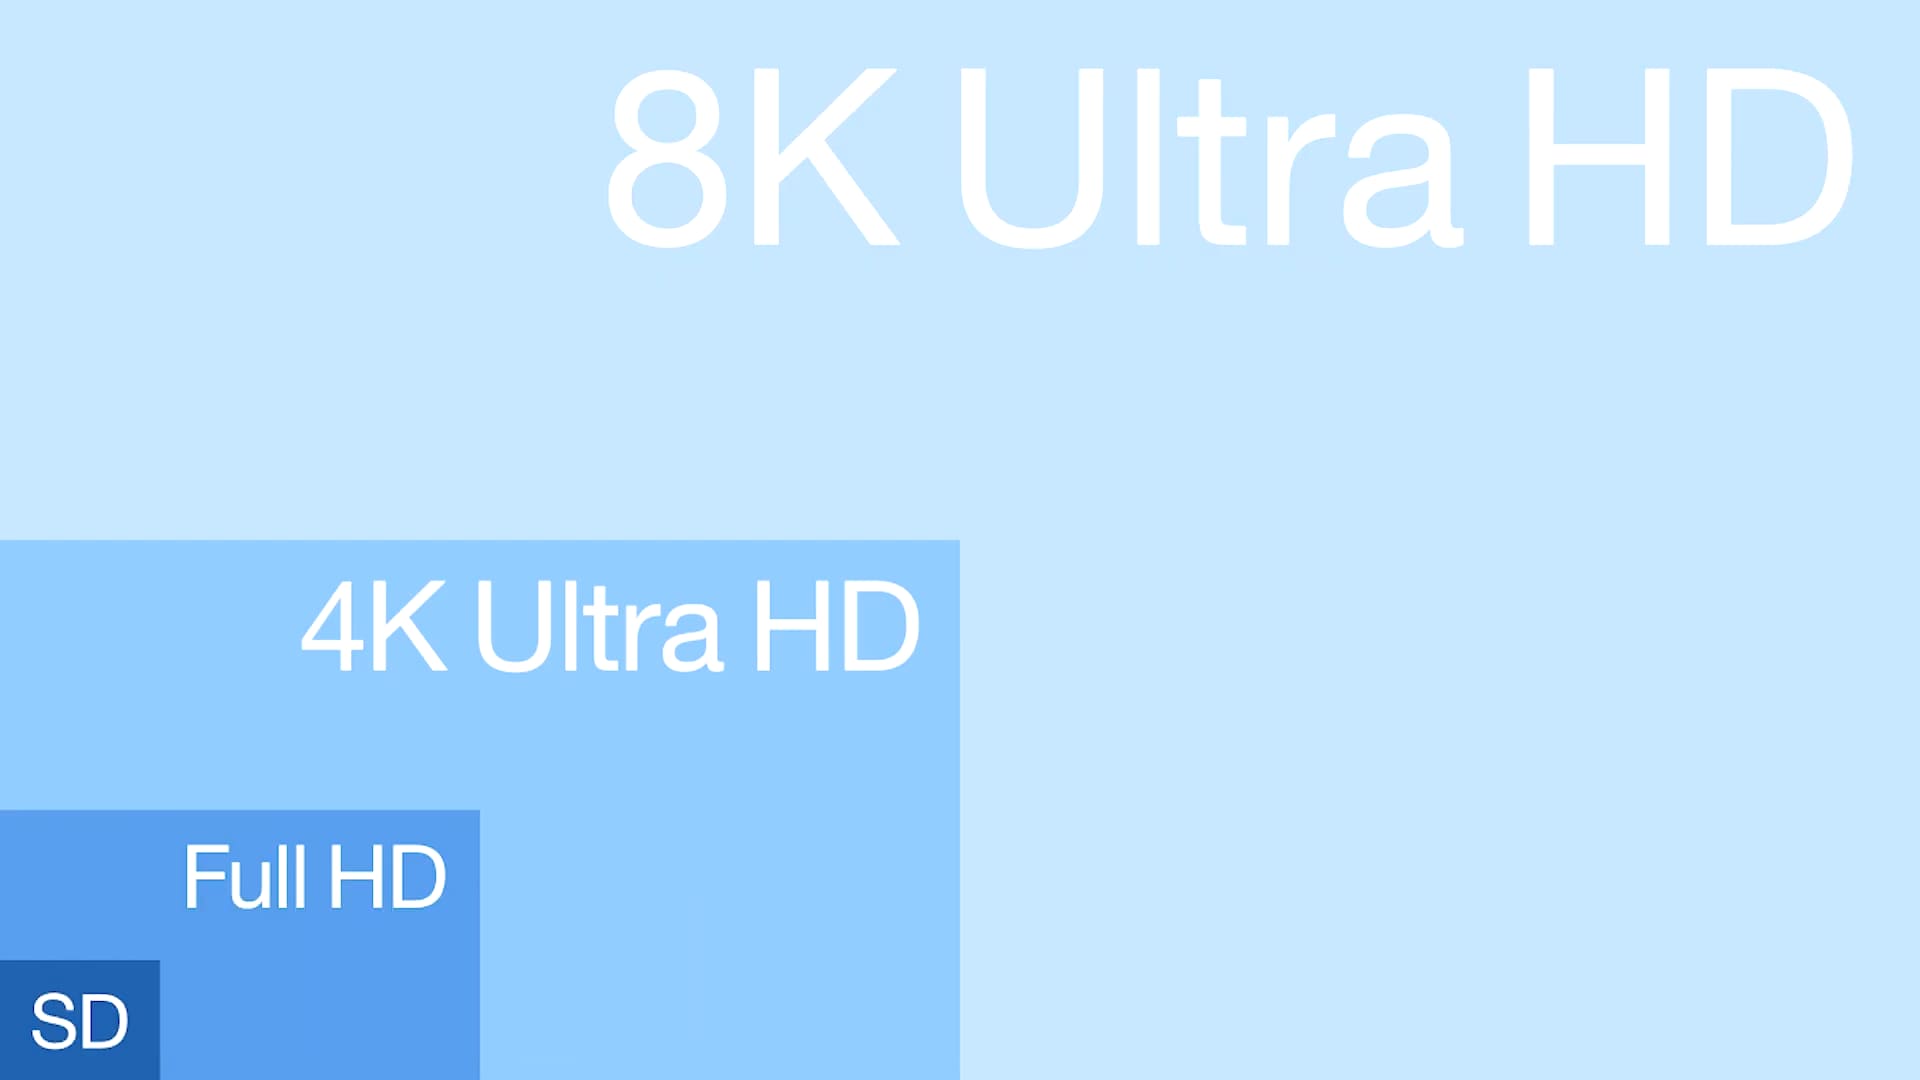 difference between a 4k and 8k resolution